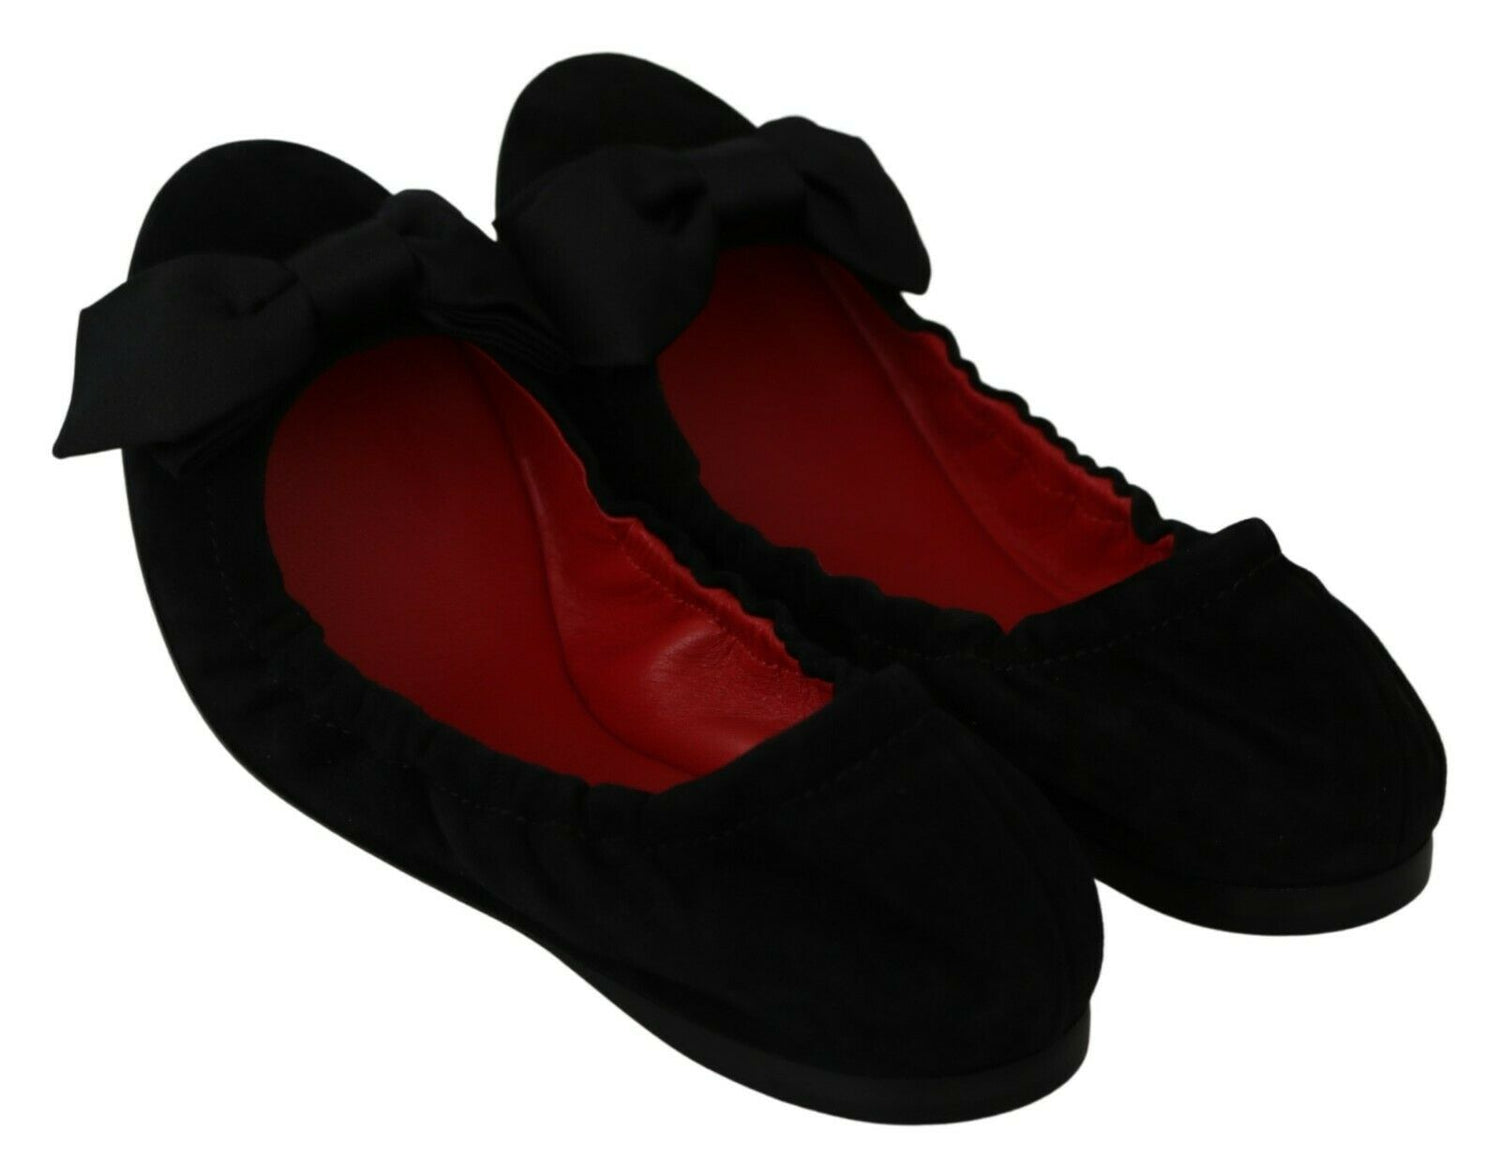 Black Suede Red Ballerina Flats Shoes